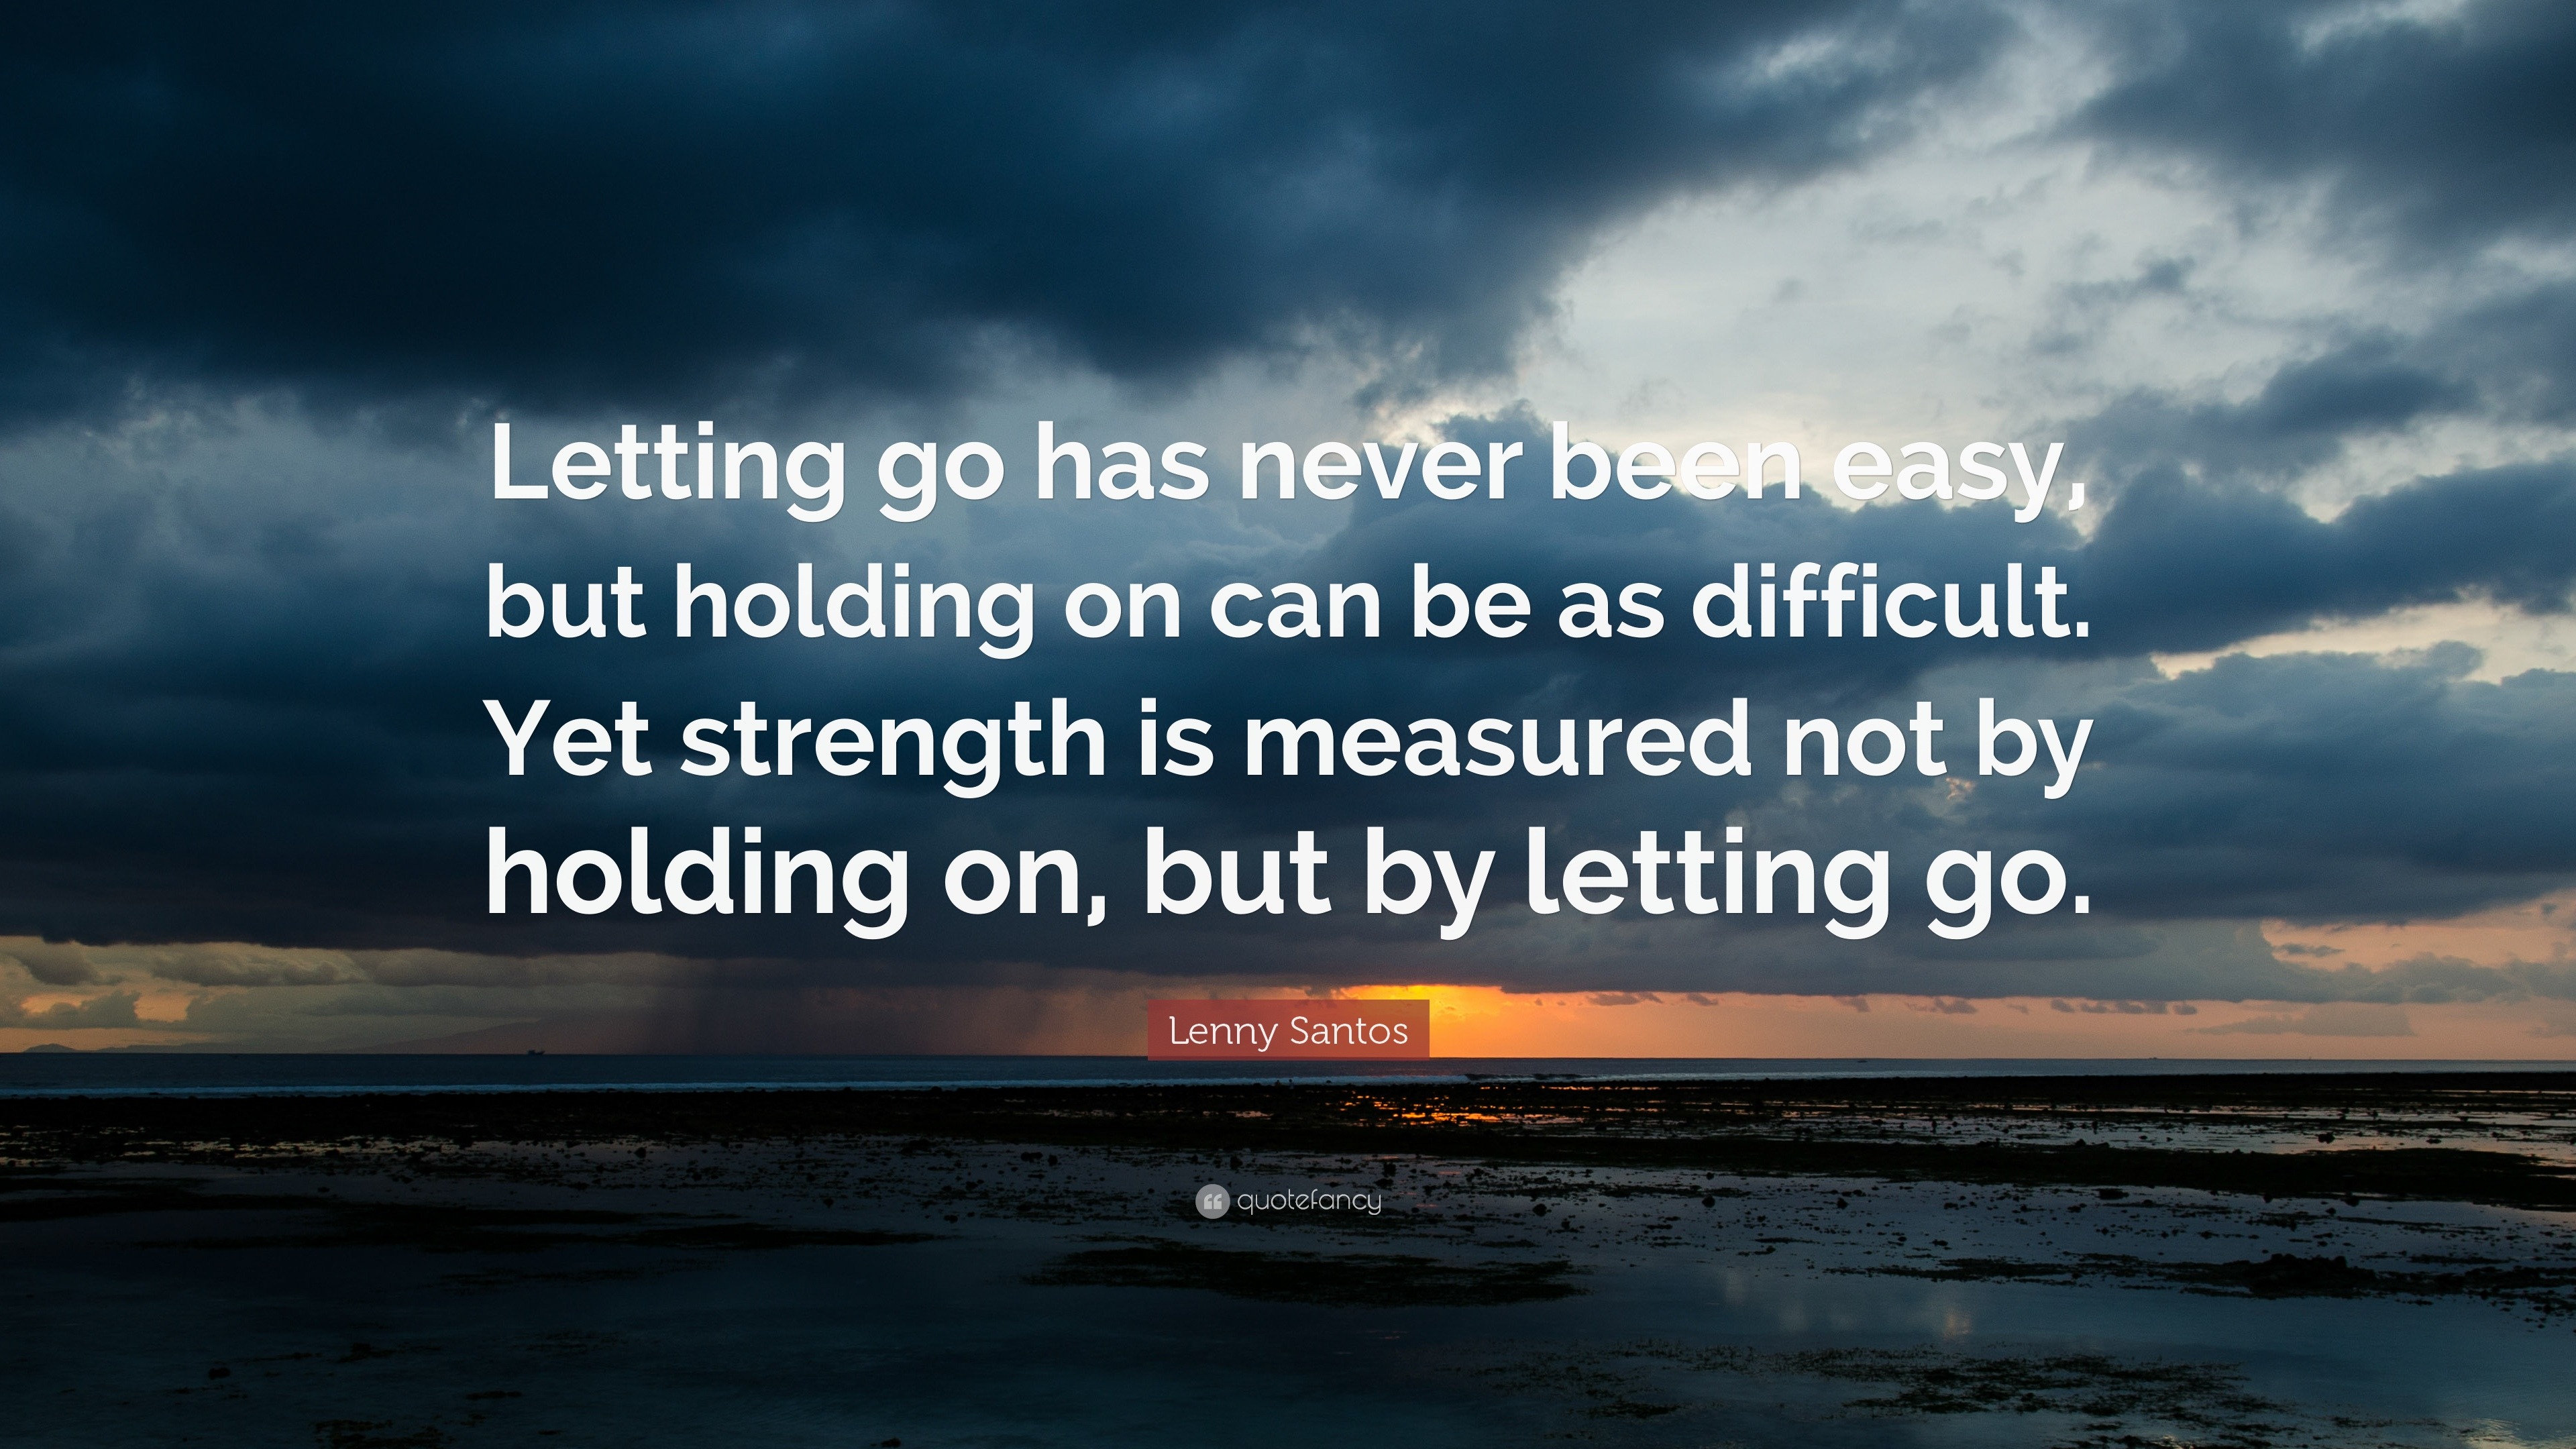 Lenny Santos Quote: “Letting go has never been easy, but holding on can